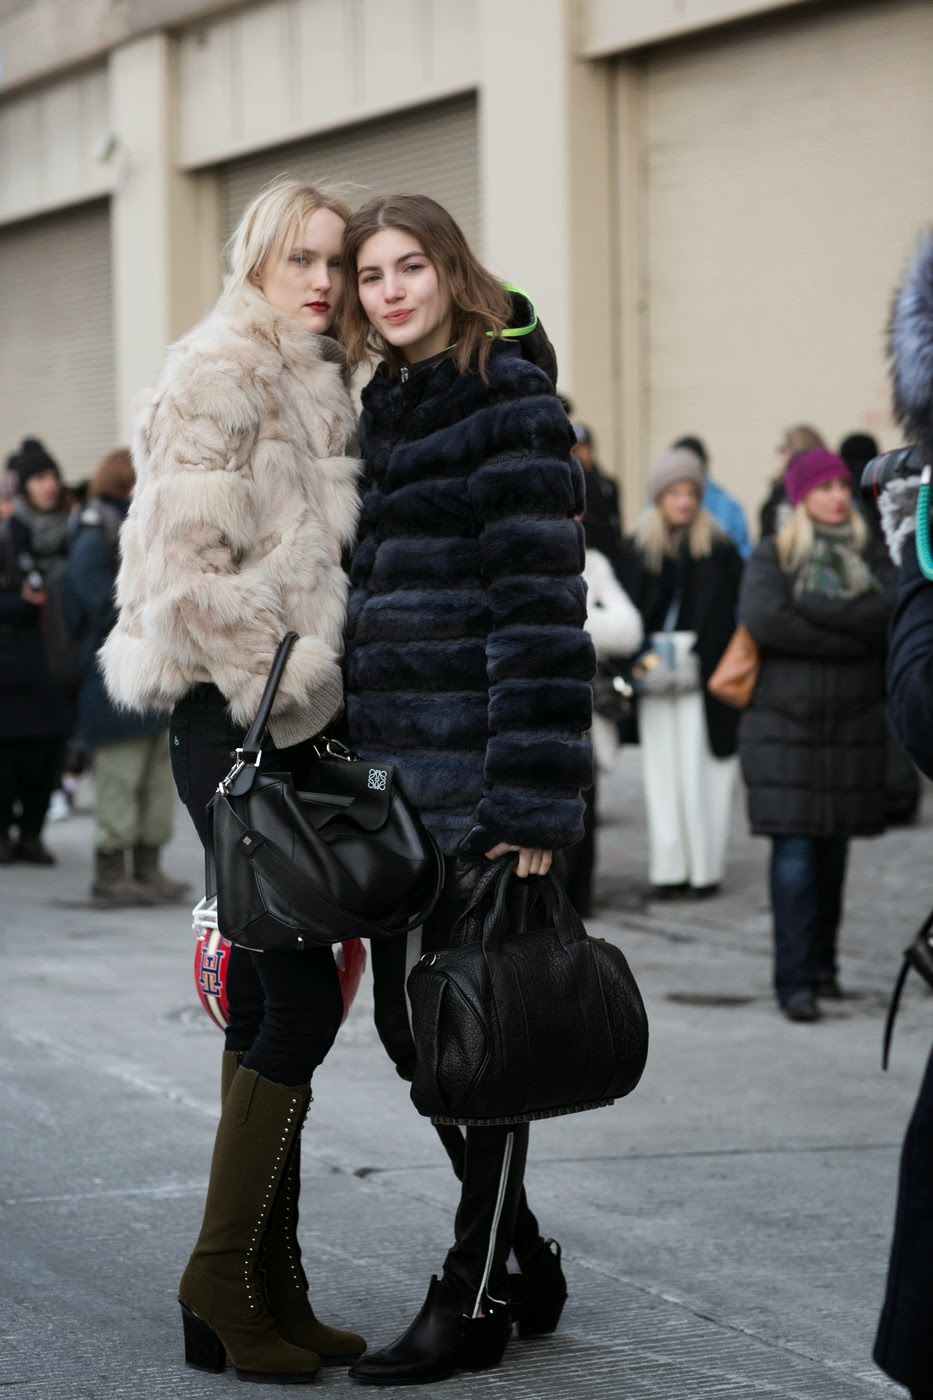 Model Street Style: New York Fashion Week A/W 2015 [PART 2] - The Front ...